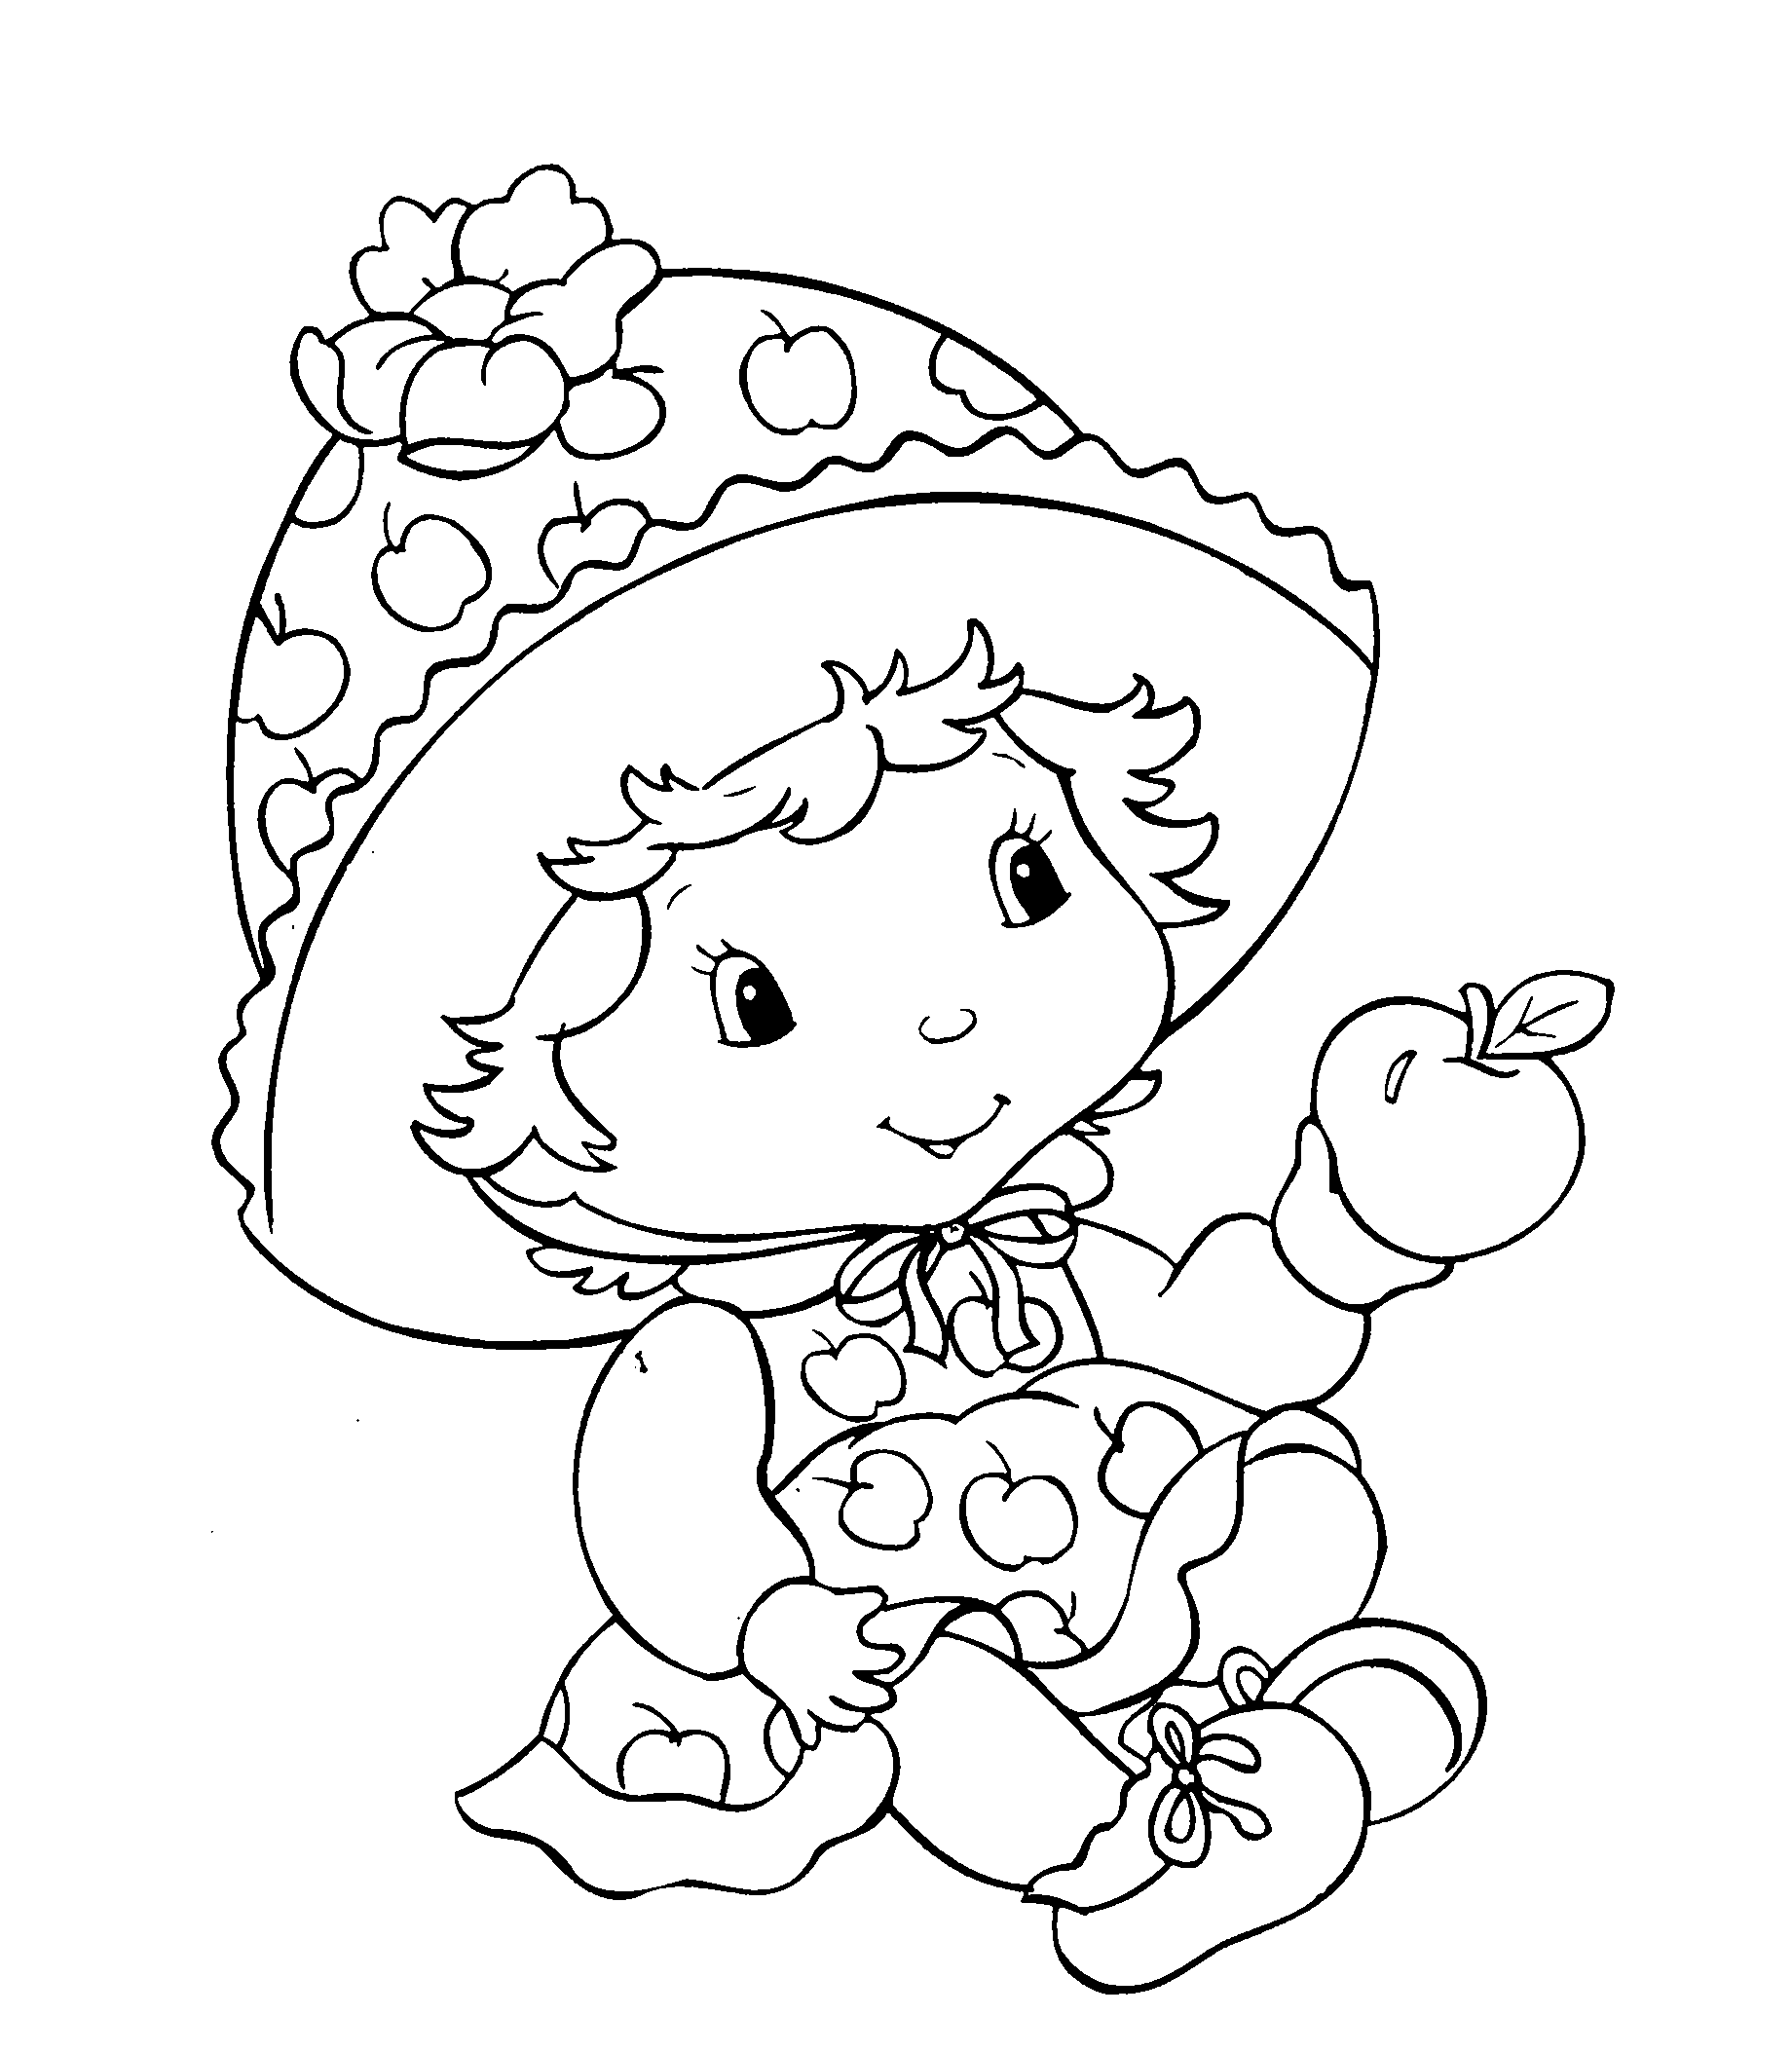 Coloring Page from a Photo — Crafthubs